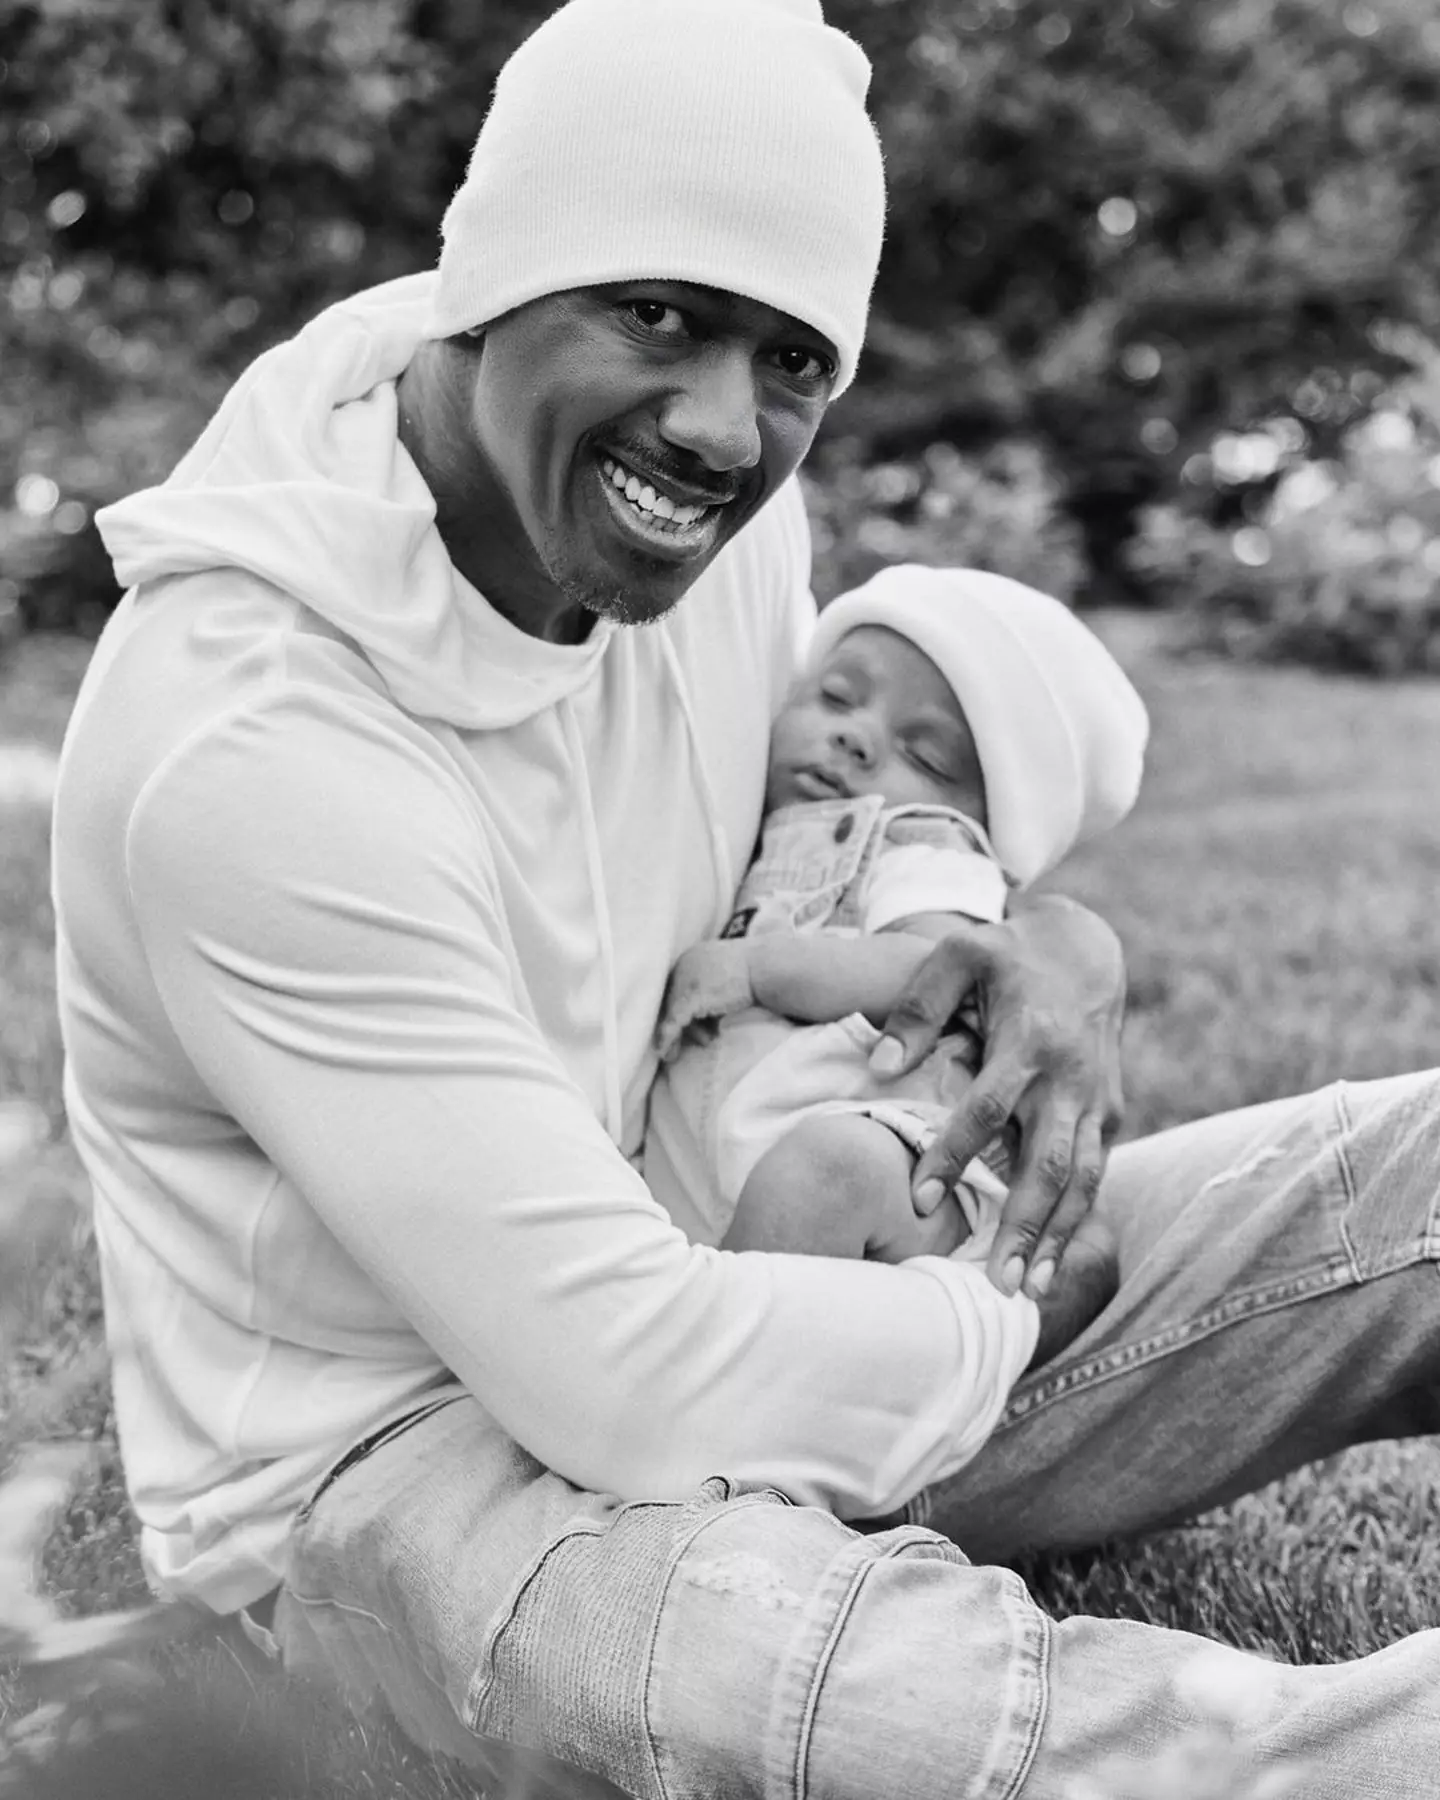 Nick Cannon shared a tribute to his late son.